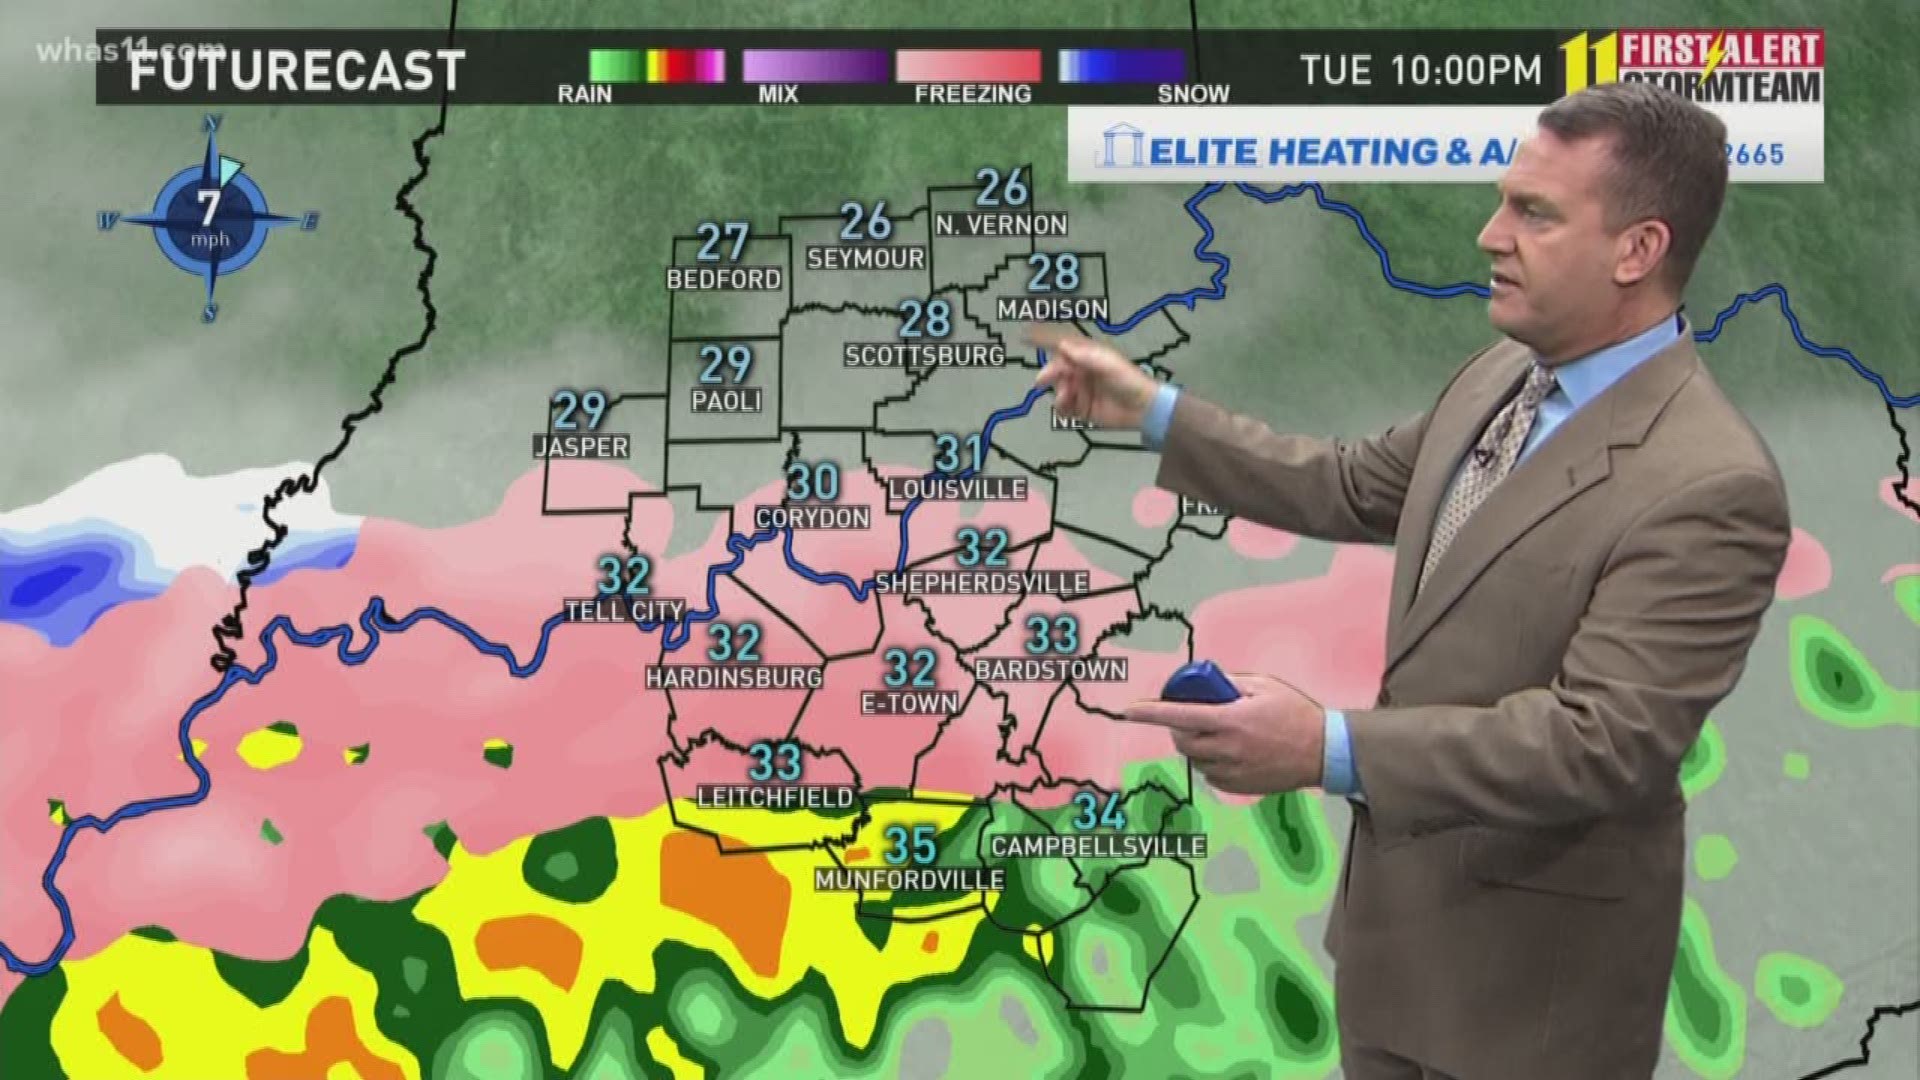 Tracking winter weather coming into the area Tuesday night into Wednesday morning